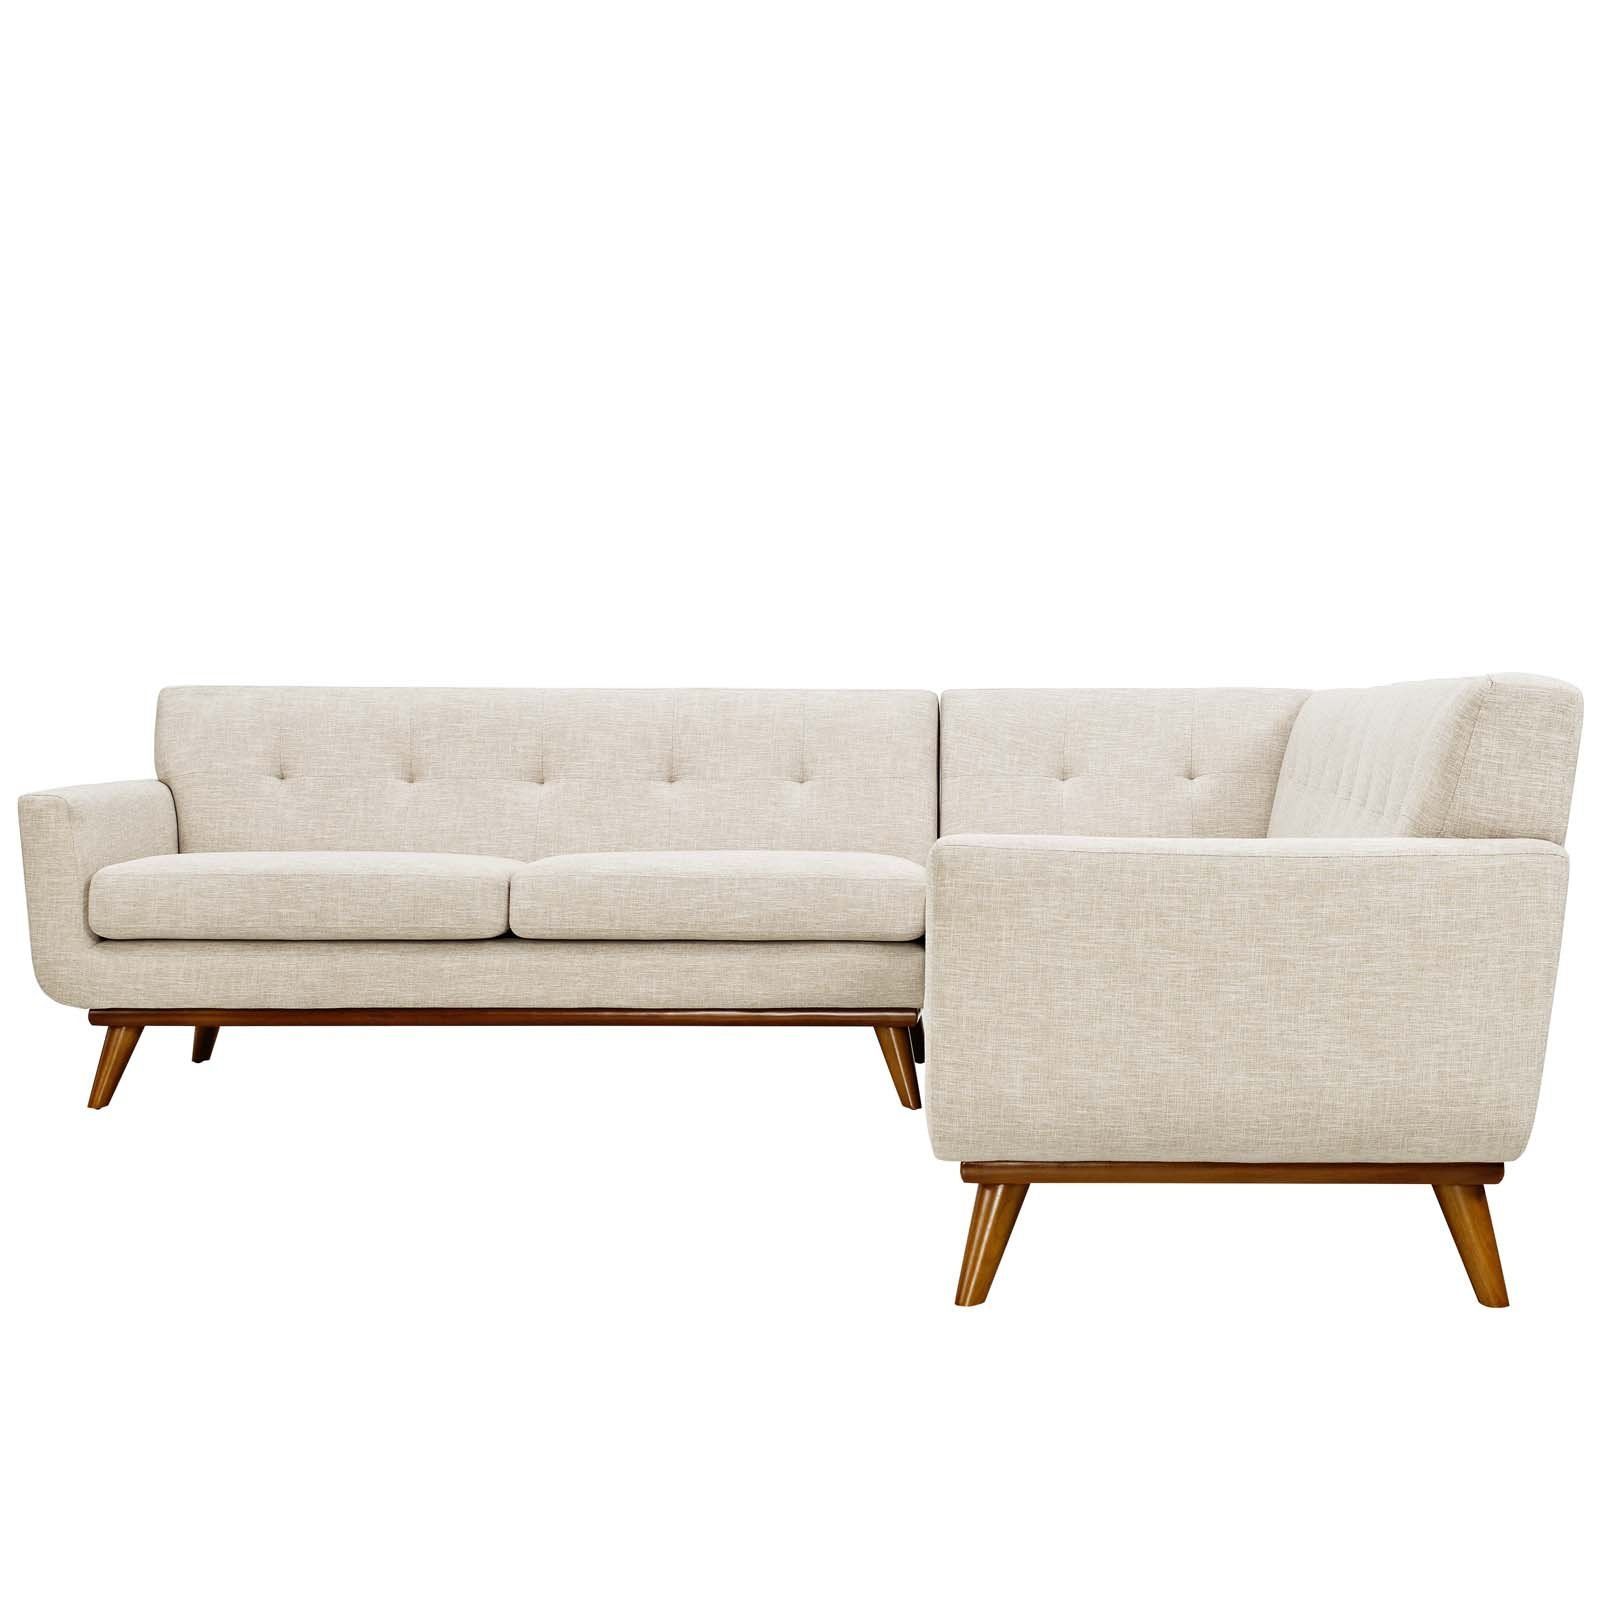 Engage L Shaped Sectional Sofa In Beige | Sectional Sofa Beige, Fabric Within Small L Shaped Sectional Sofas In Beige (View 15 of 21)